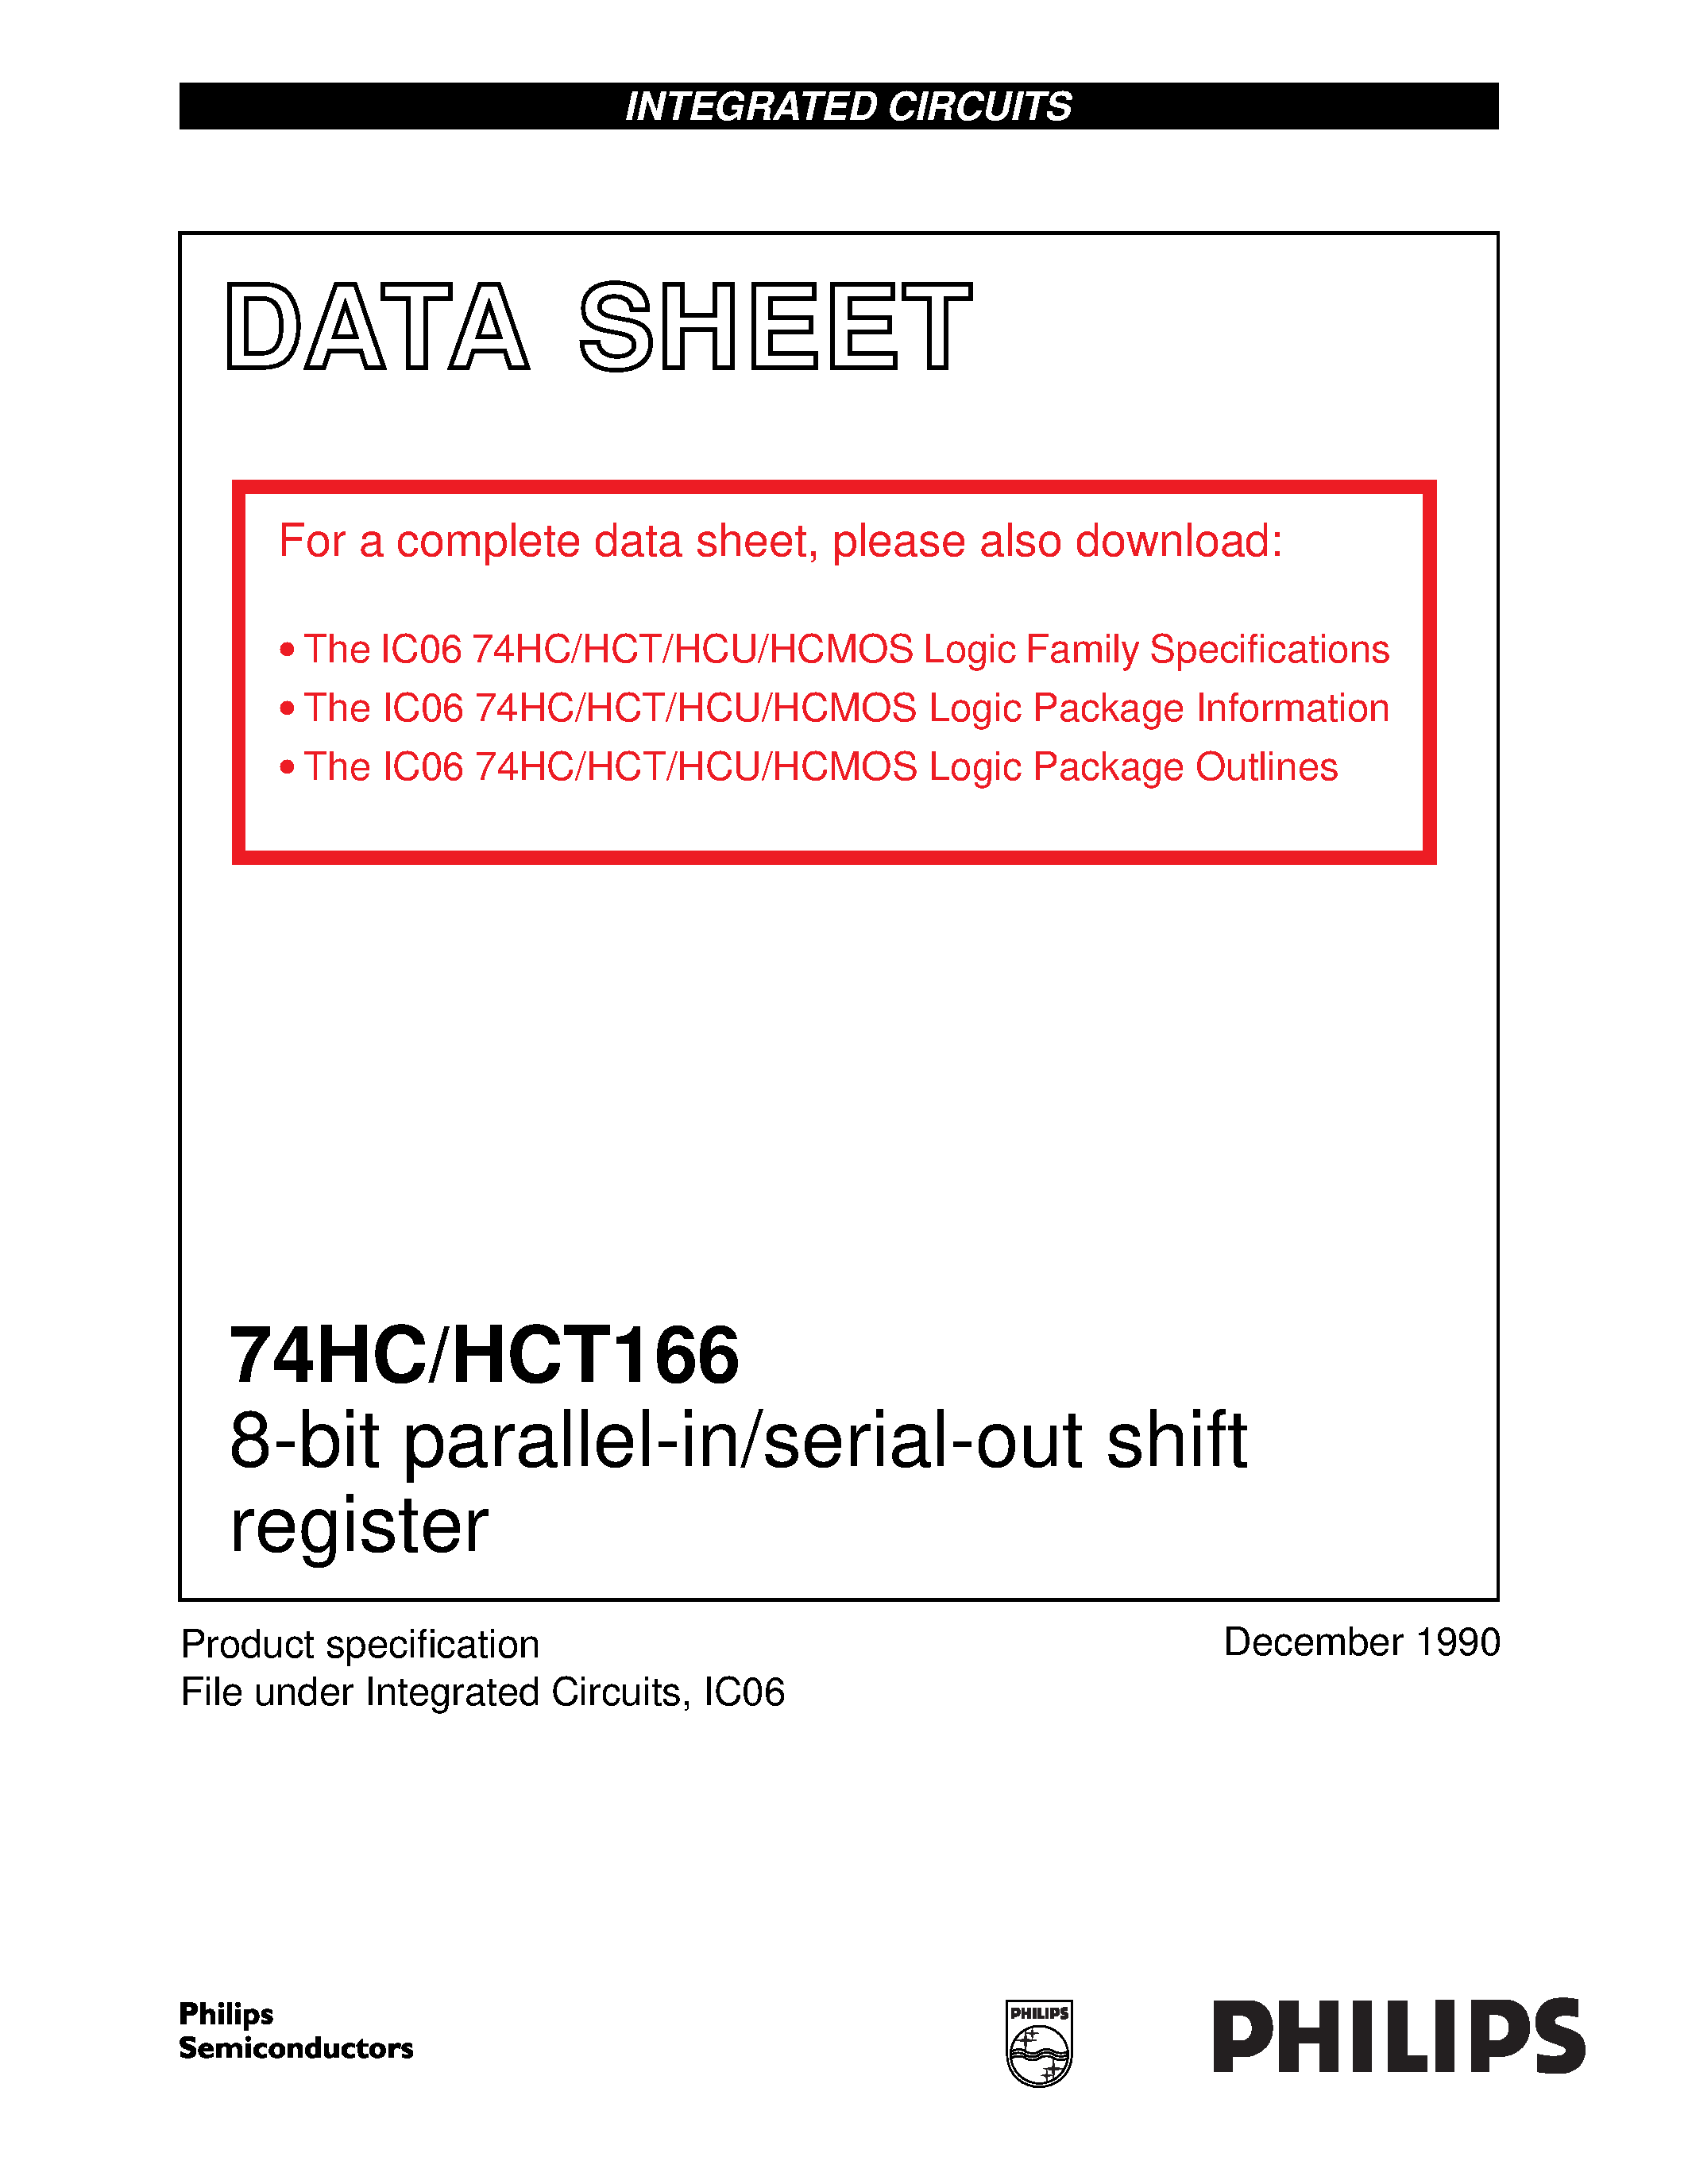 Datasheet 74HCT166 - 8-bit parallel-in/serial-out shift register page 1